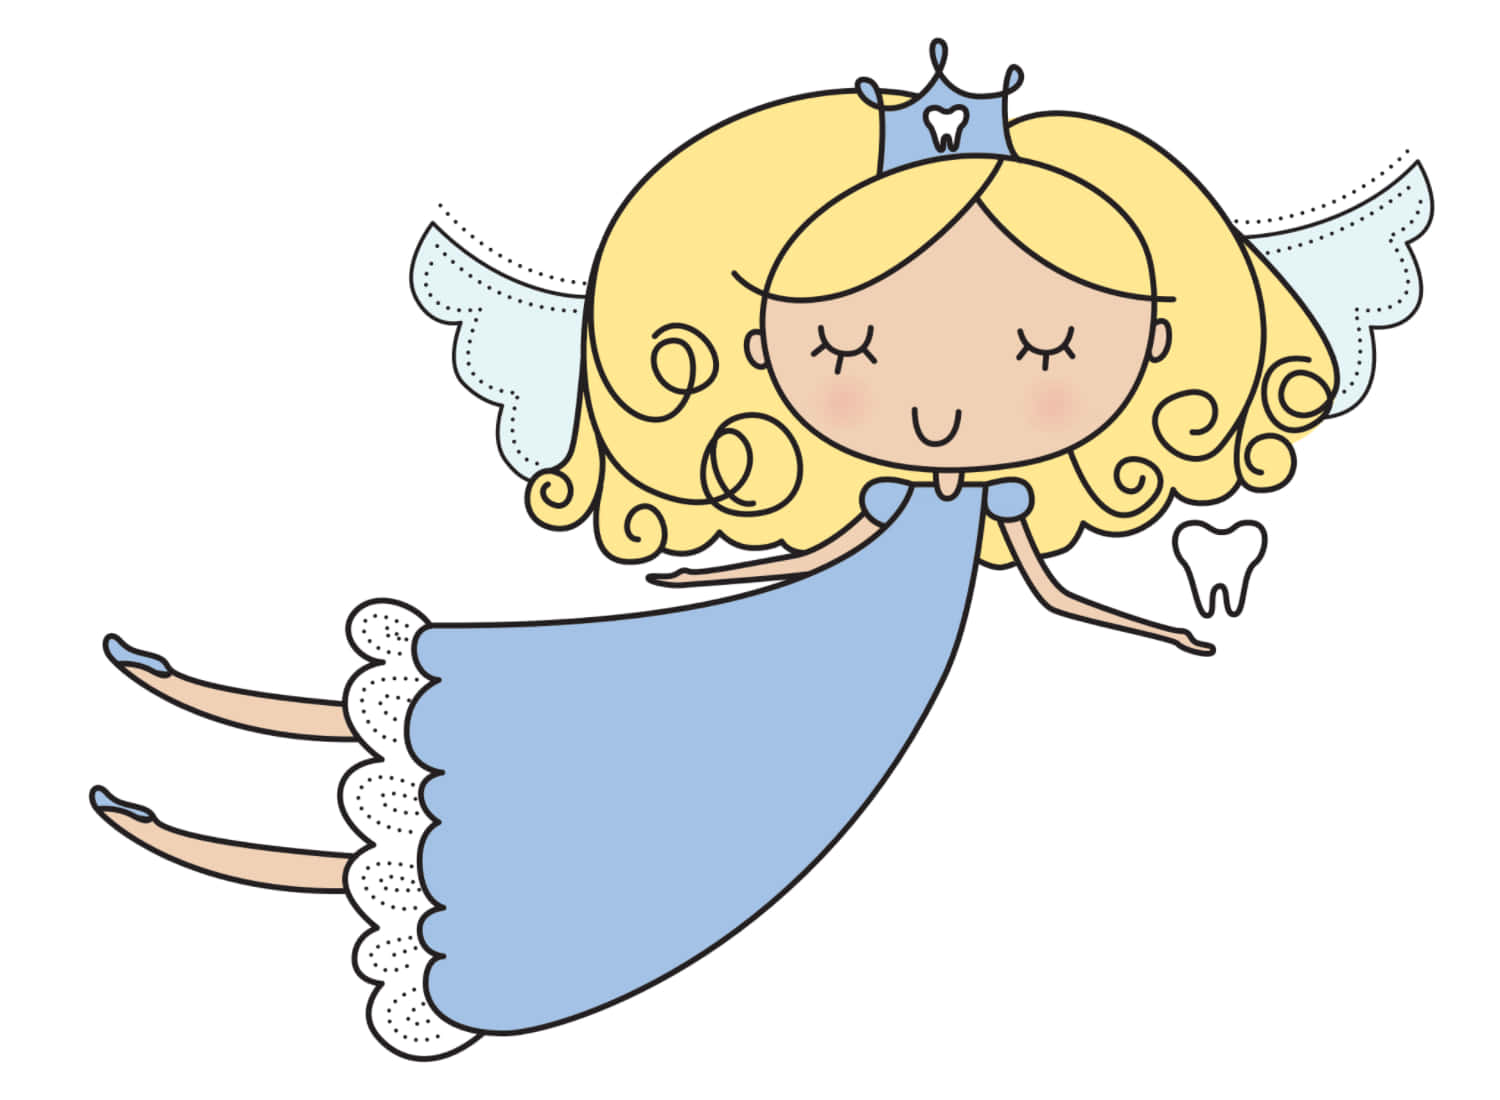 A magical Tooth Fairy is ready to collect teeth under the pillow of a young child.